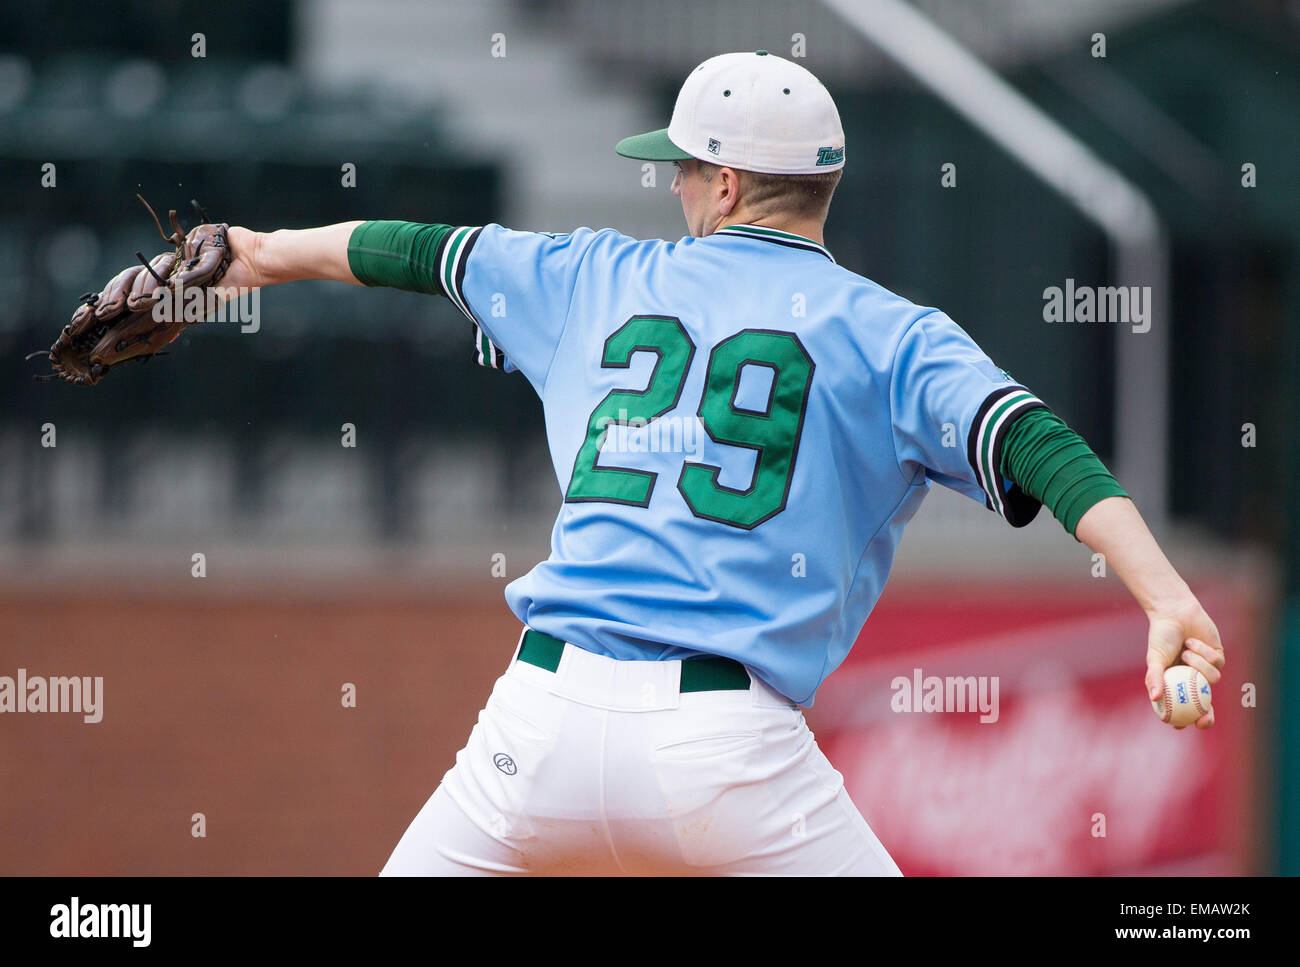 New Orleans, LA, USA. 18th Apr, 2015. Tulane pitcher Emerson Gibbs (29) during the game between Tulane and UCF at Greer Field at Turchin Stadium in New Orleans, LA. UCF defeats Tulane 8-0 © csm/Alamy Live News Stock Photo